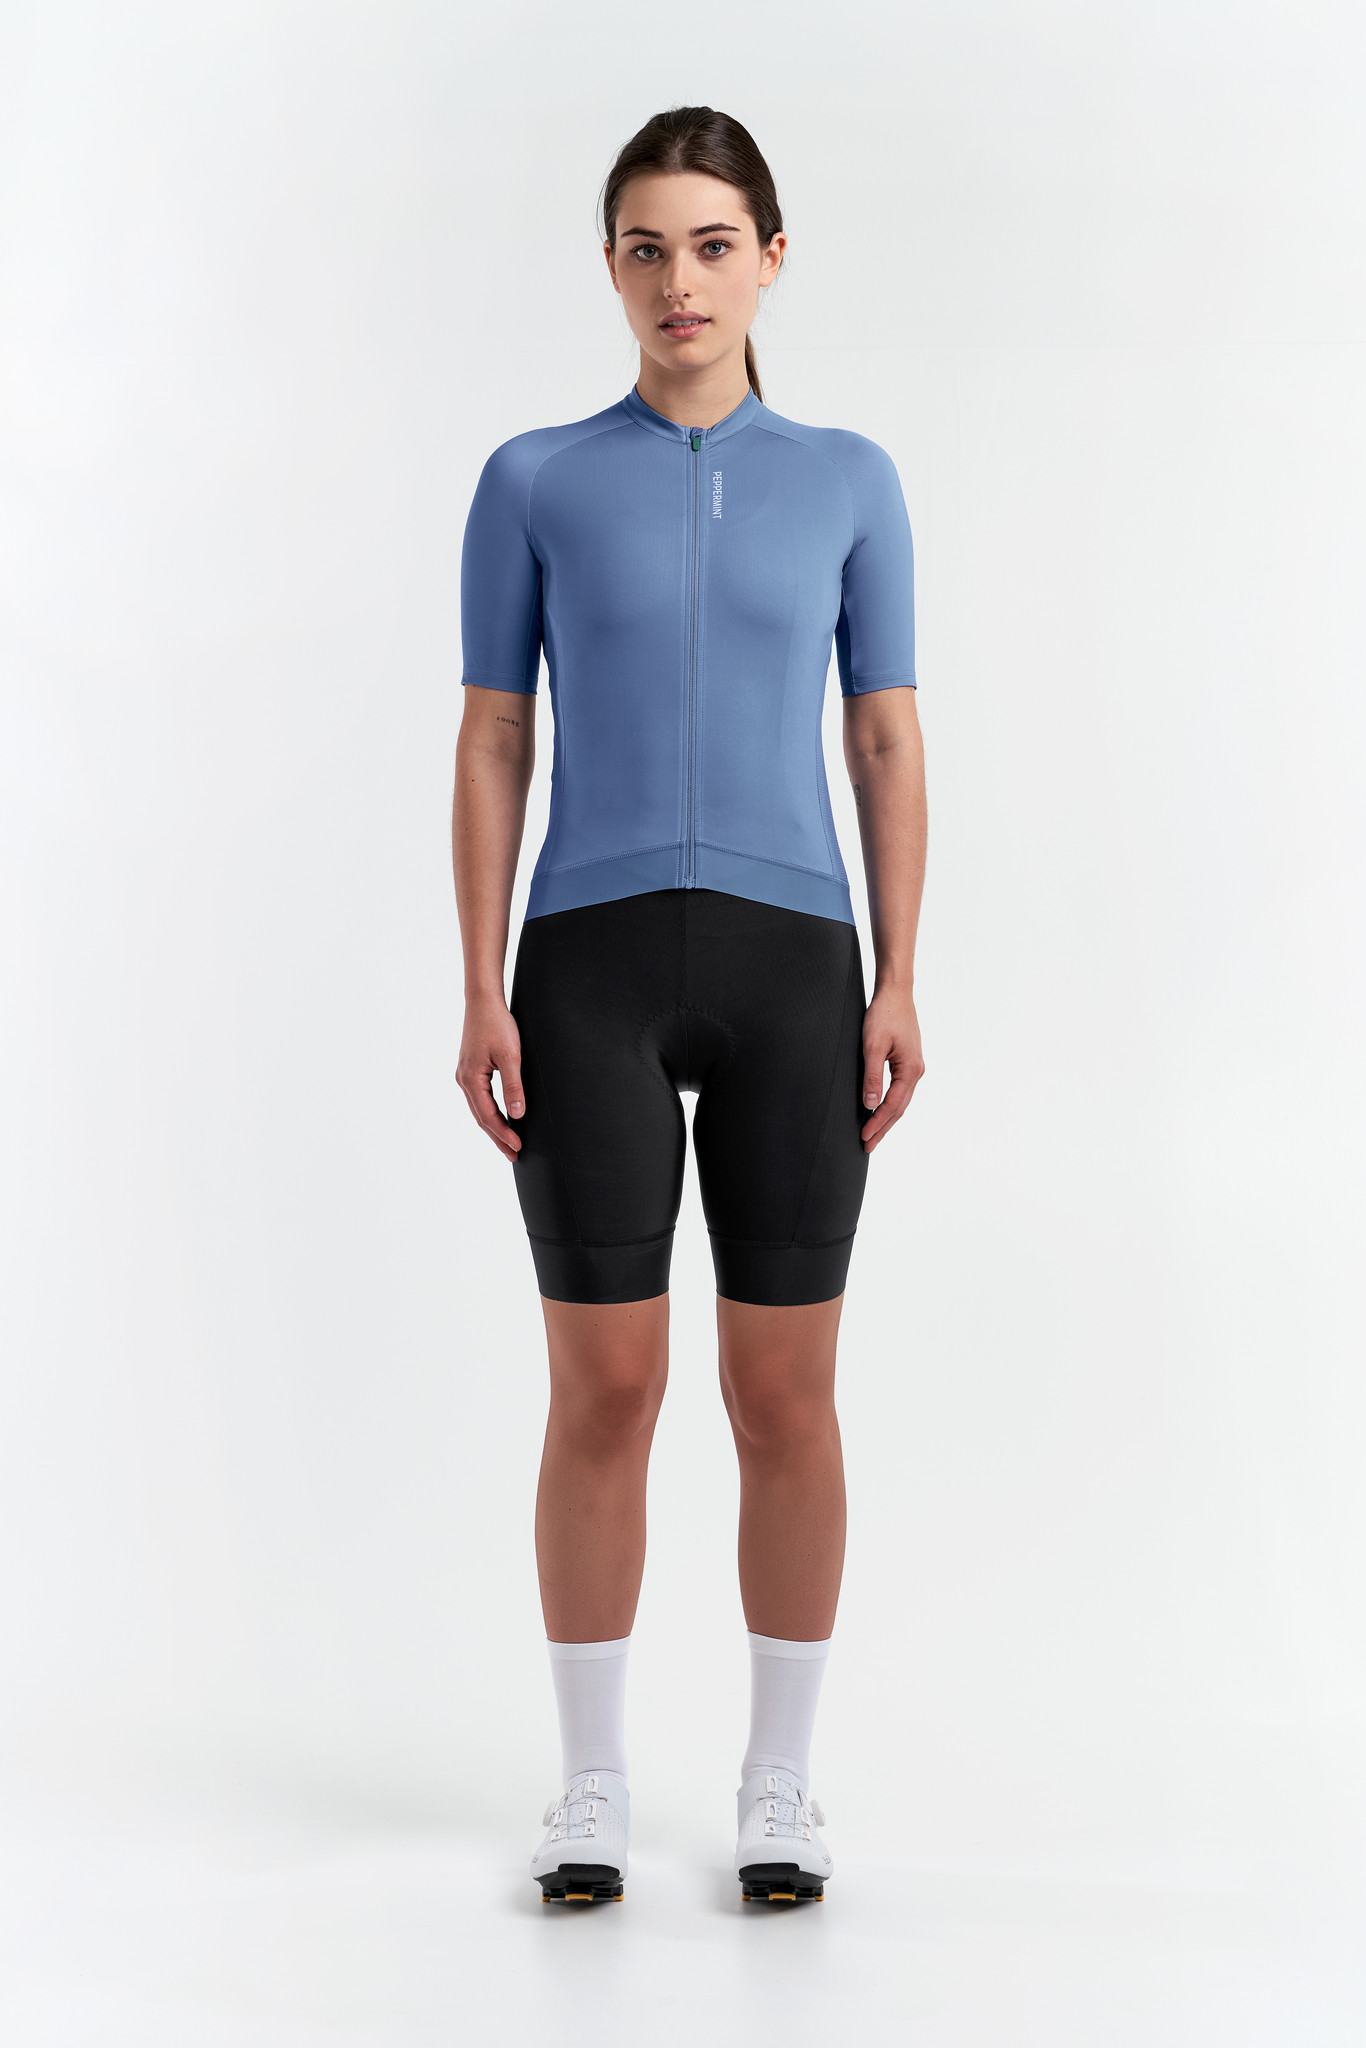 Peppermint Padded Underwear - Cycle Néron